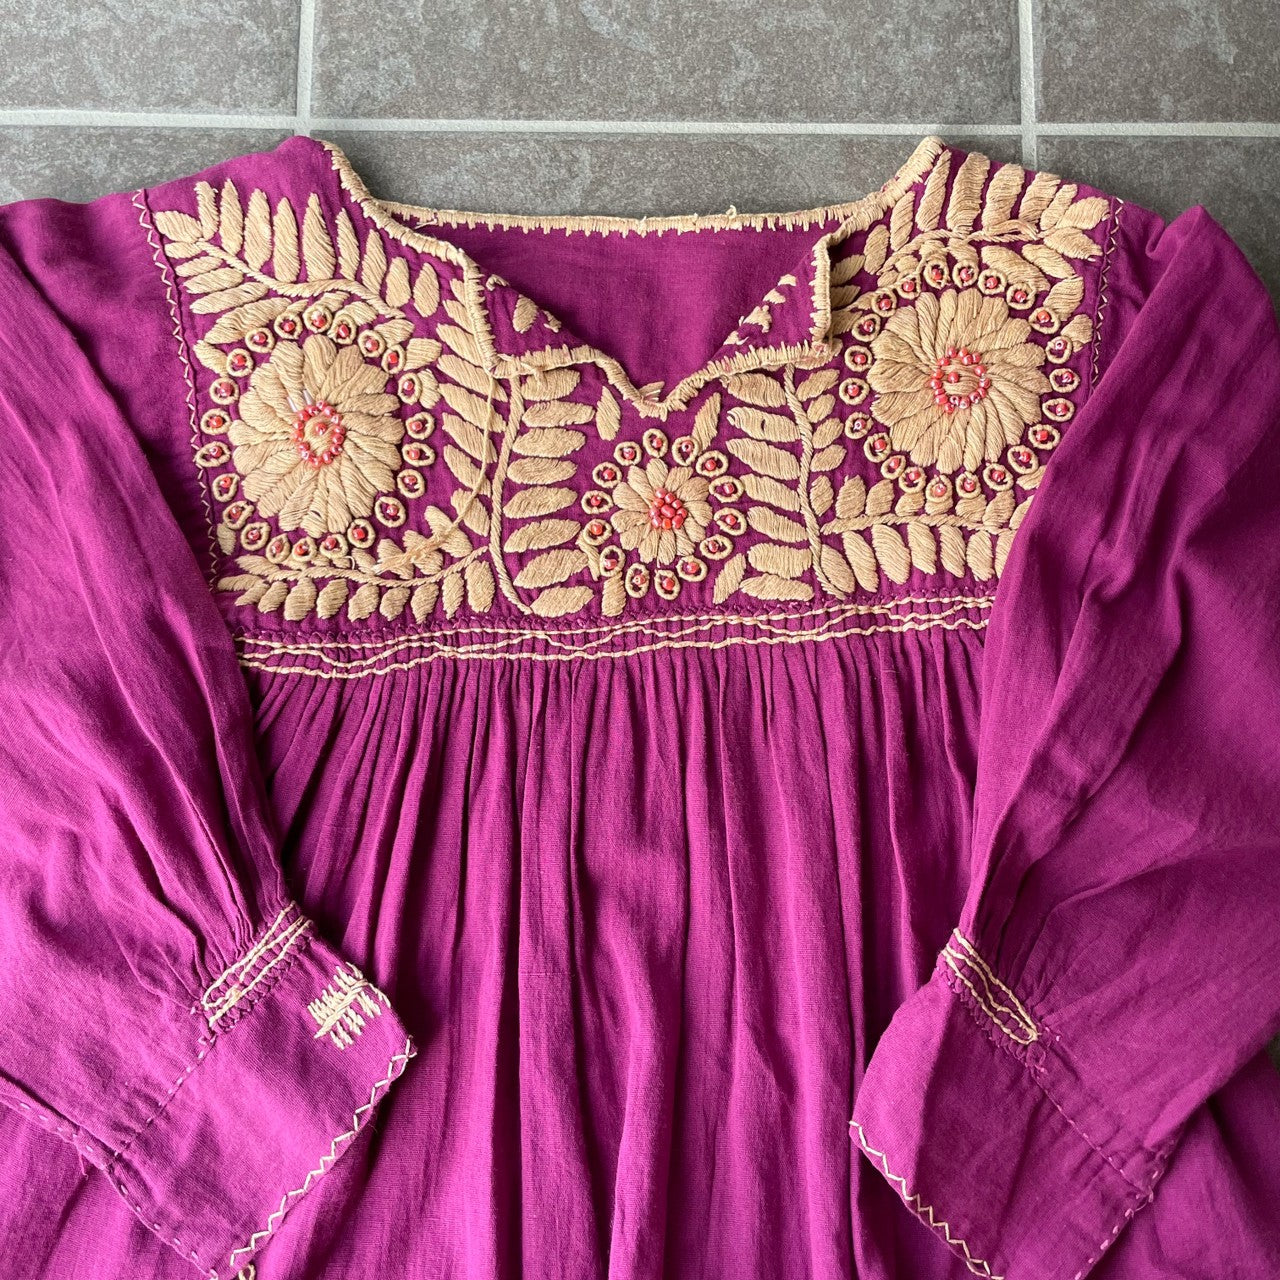 Mexican Embroidery Blouse #3／メキシコ 刺繍 ブラウス トップス